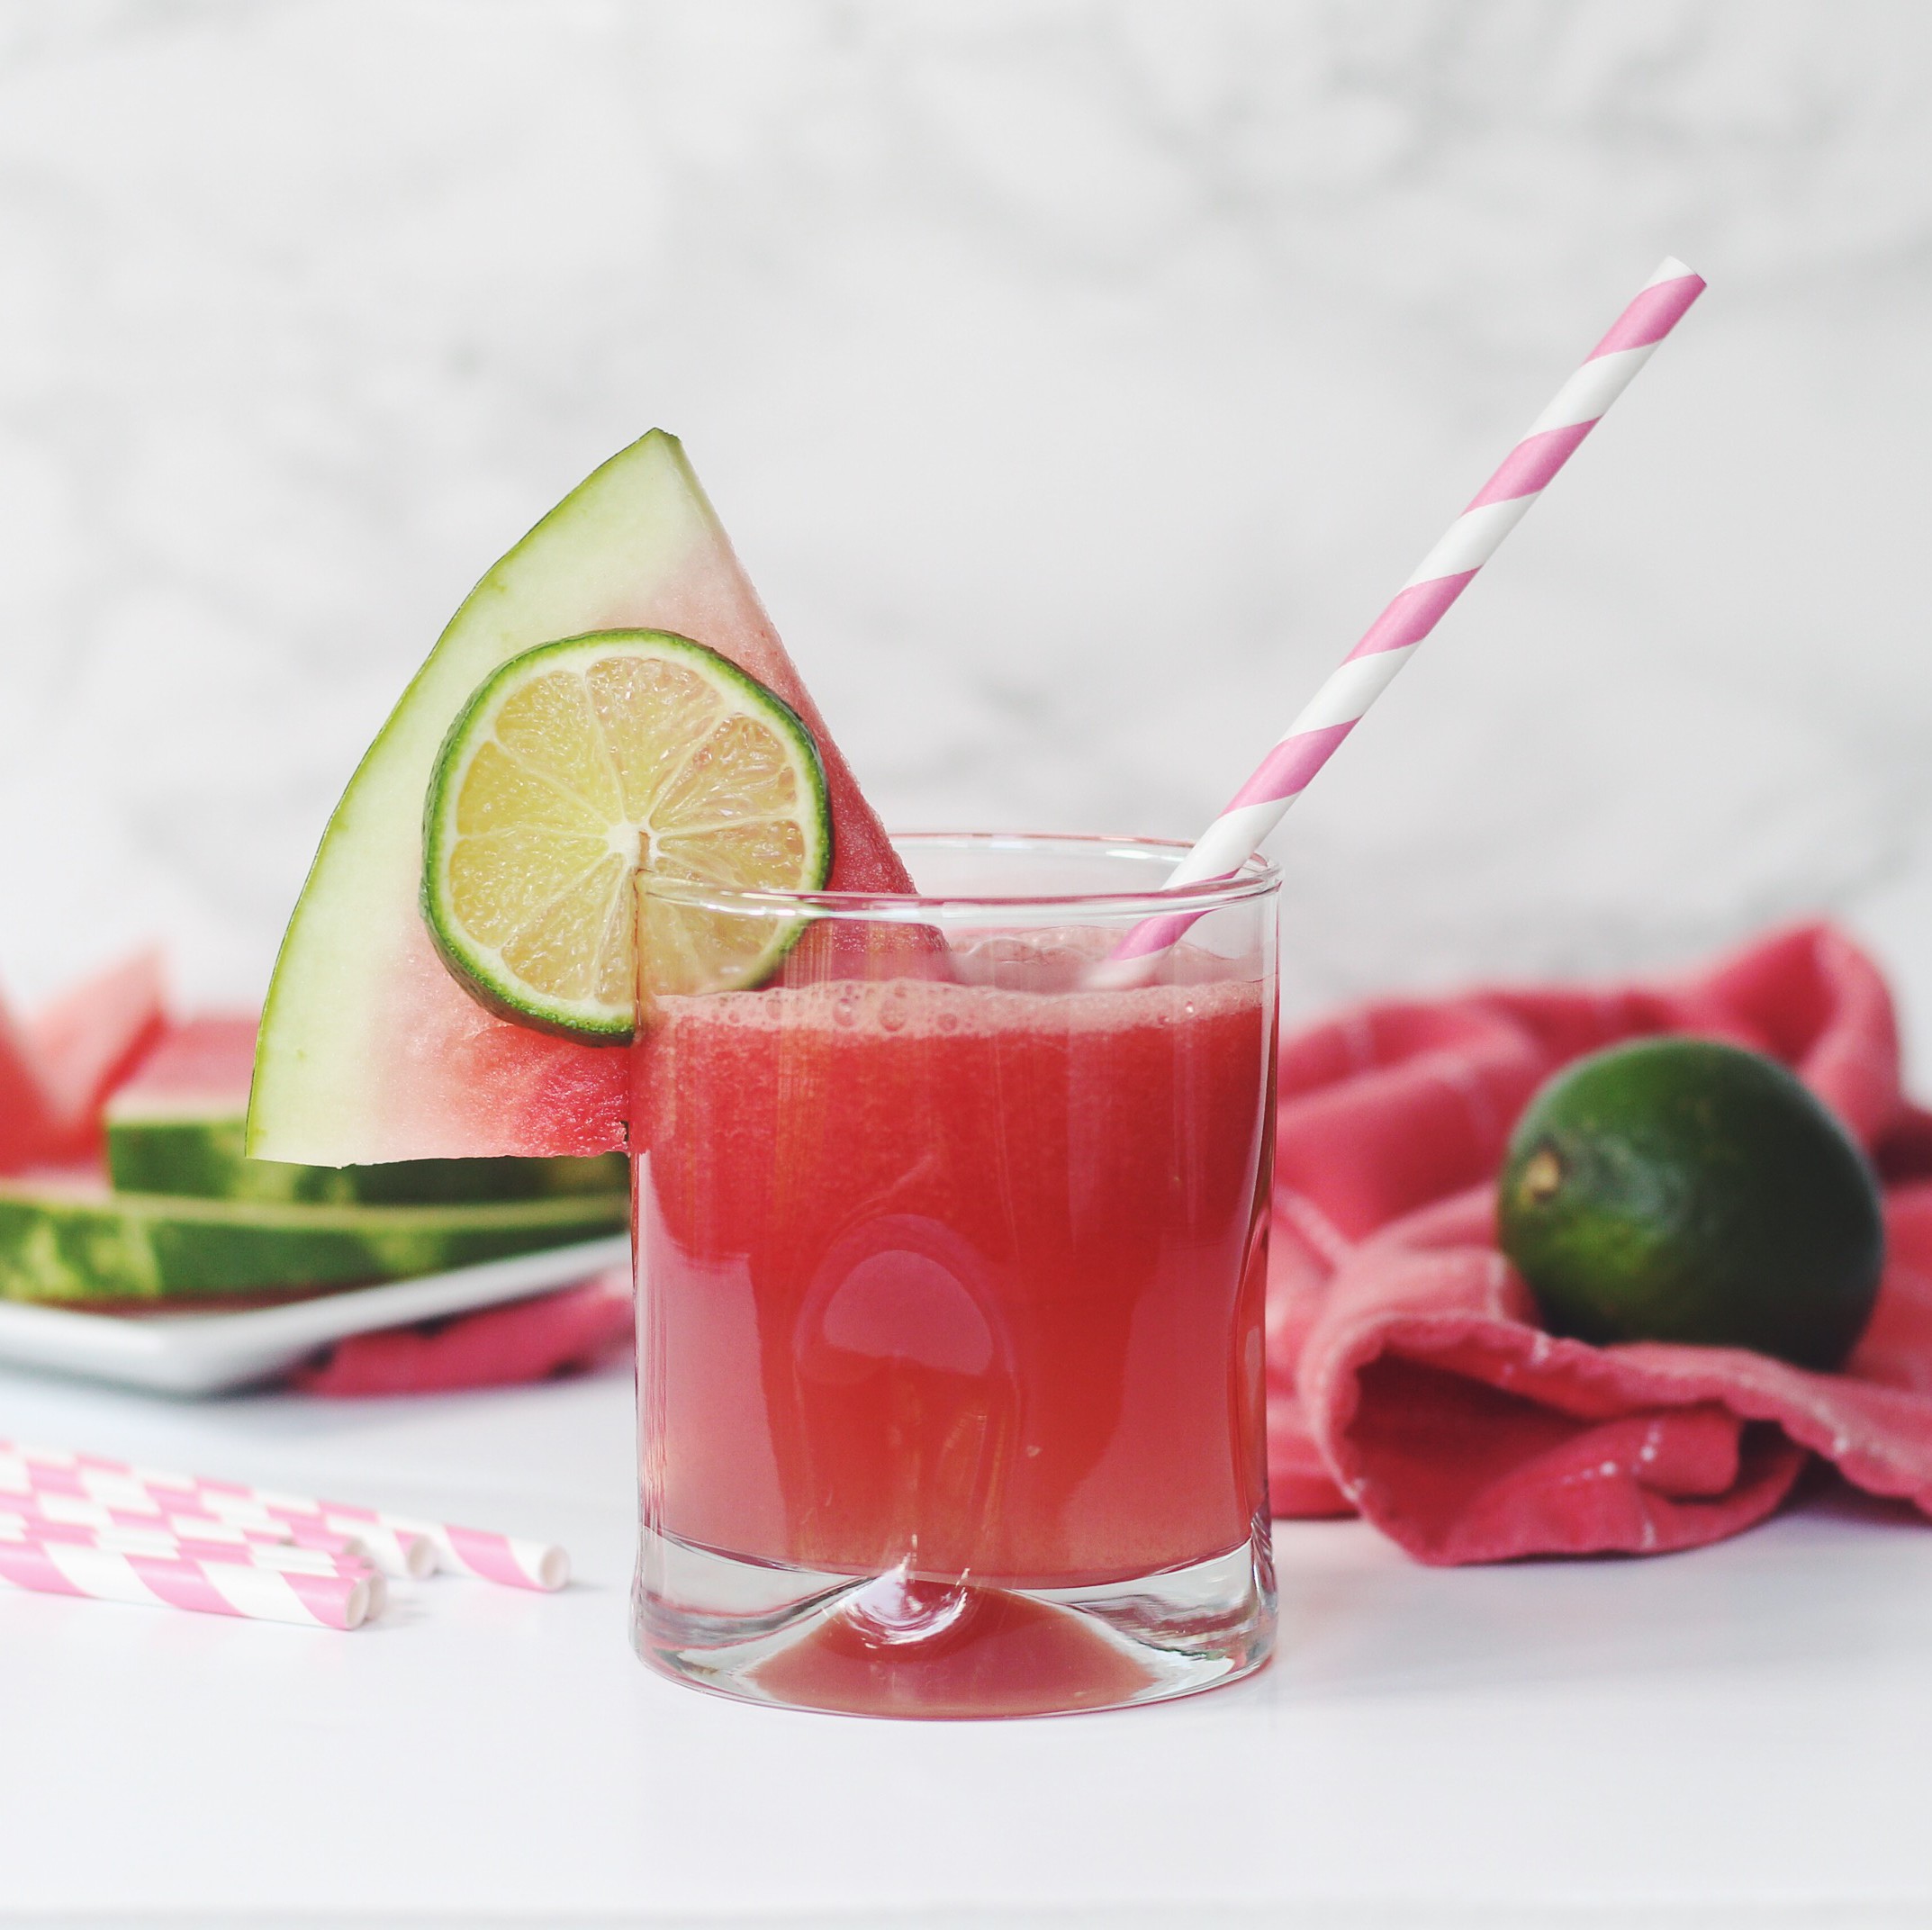 How To Make Fresh Watermelon Juice At Home In Lubuklinggau City